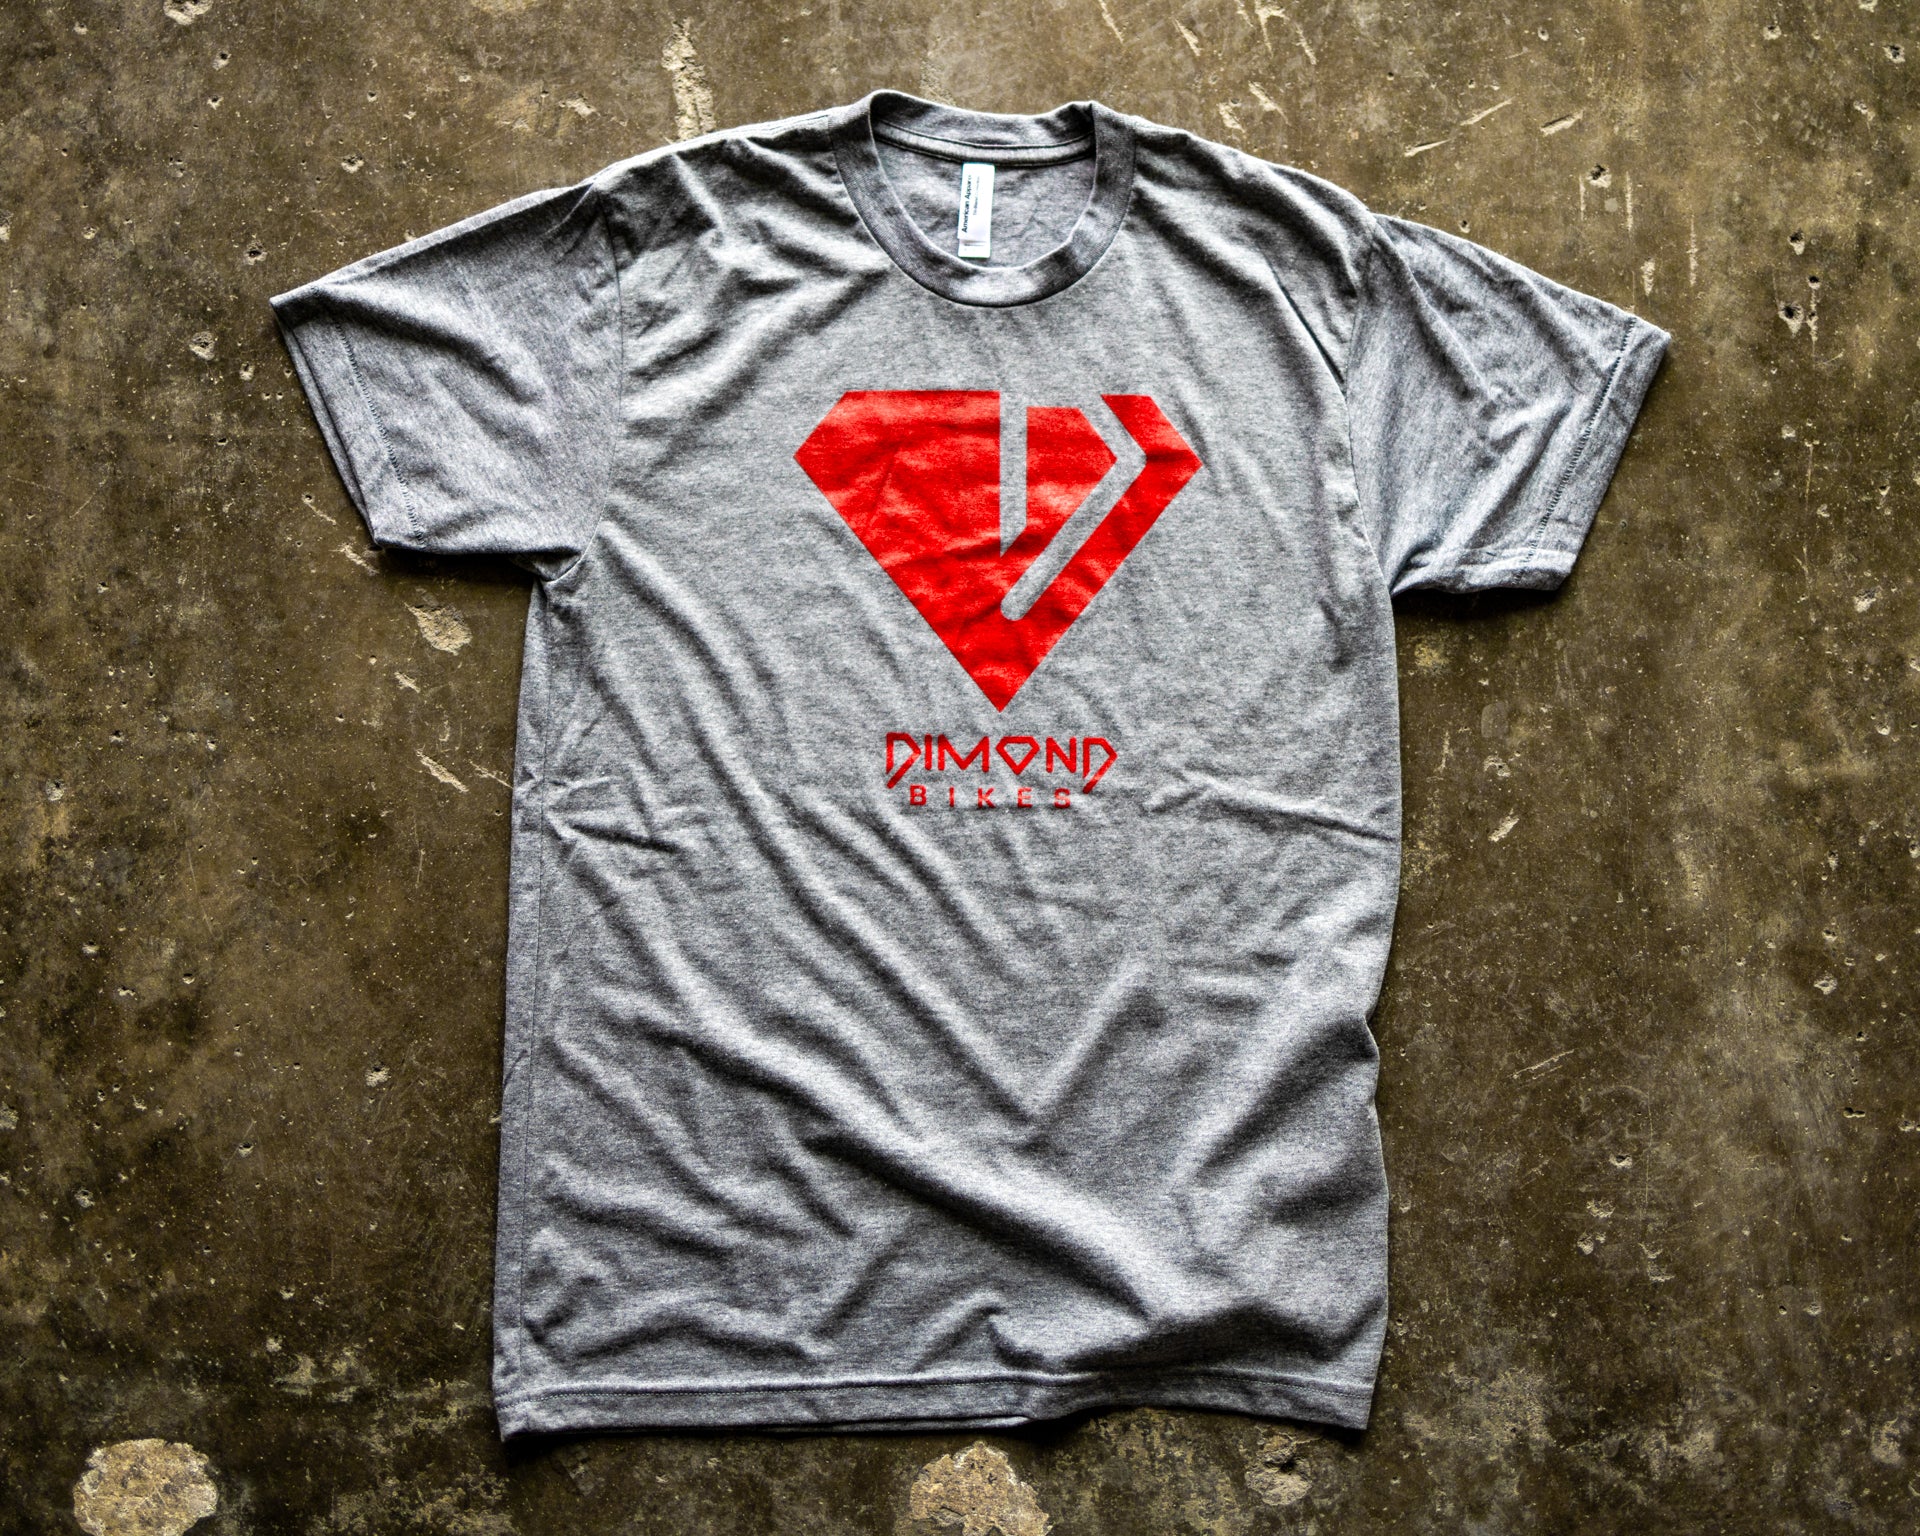 Dimond Logo Crest Gray and Red Shirt for Sale